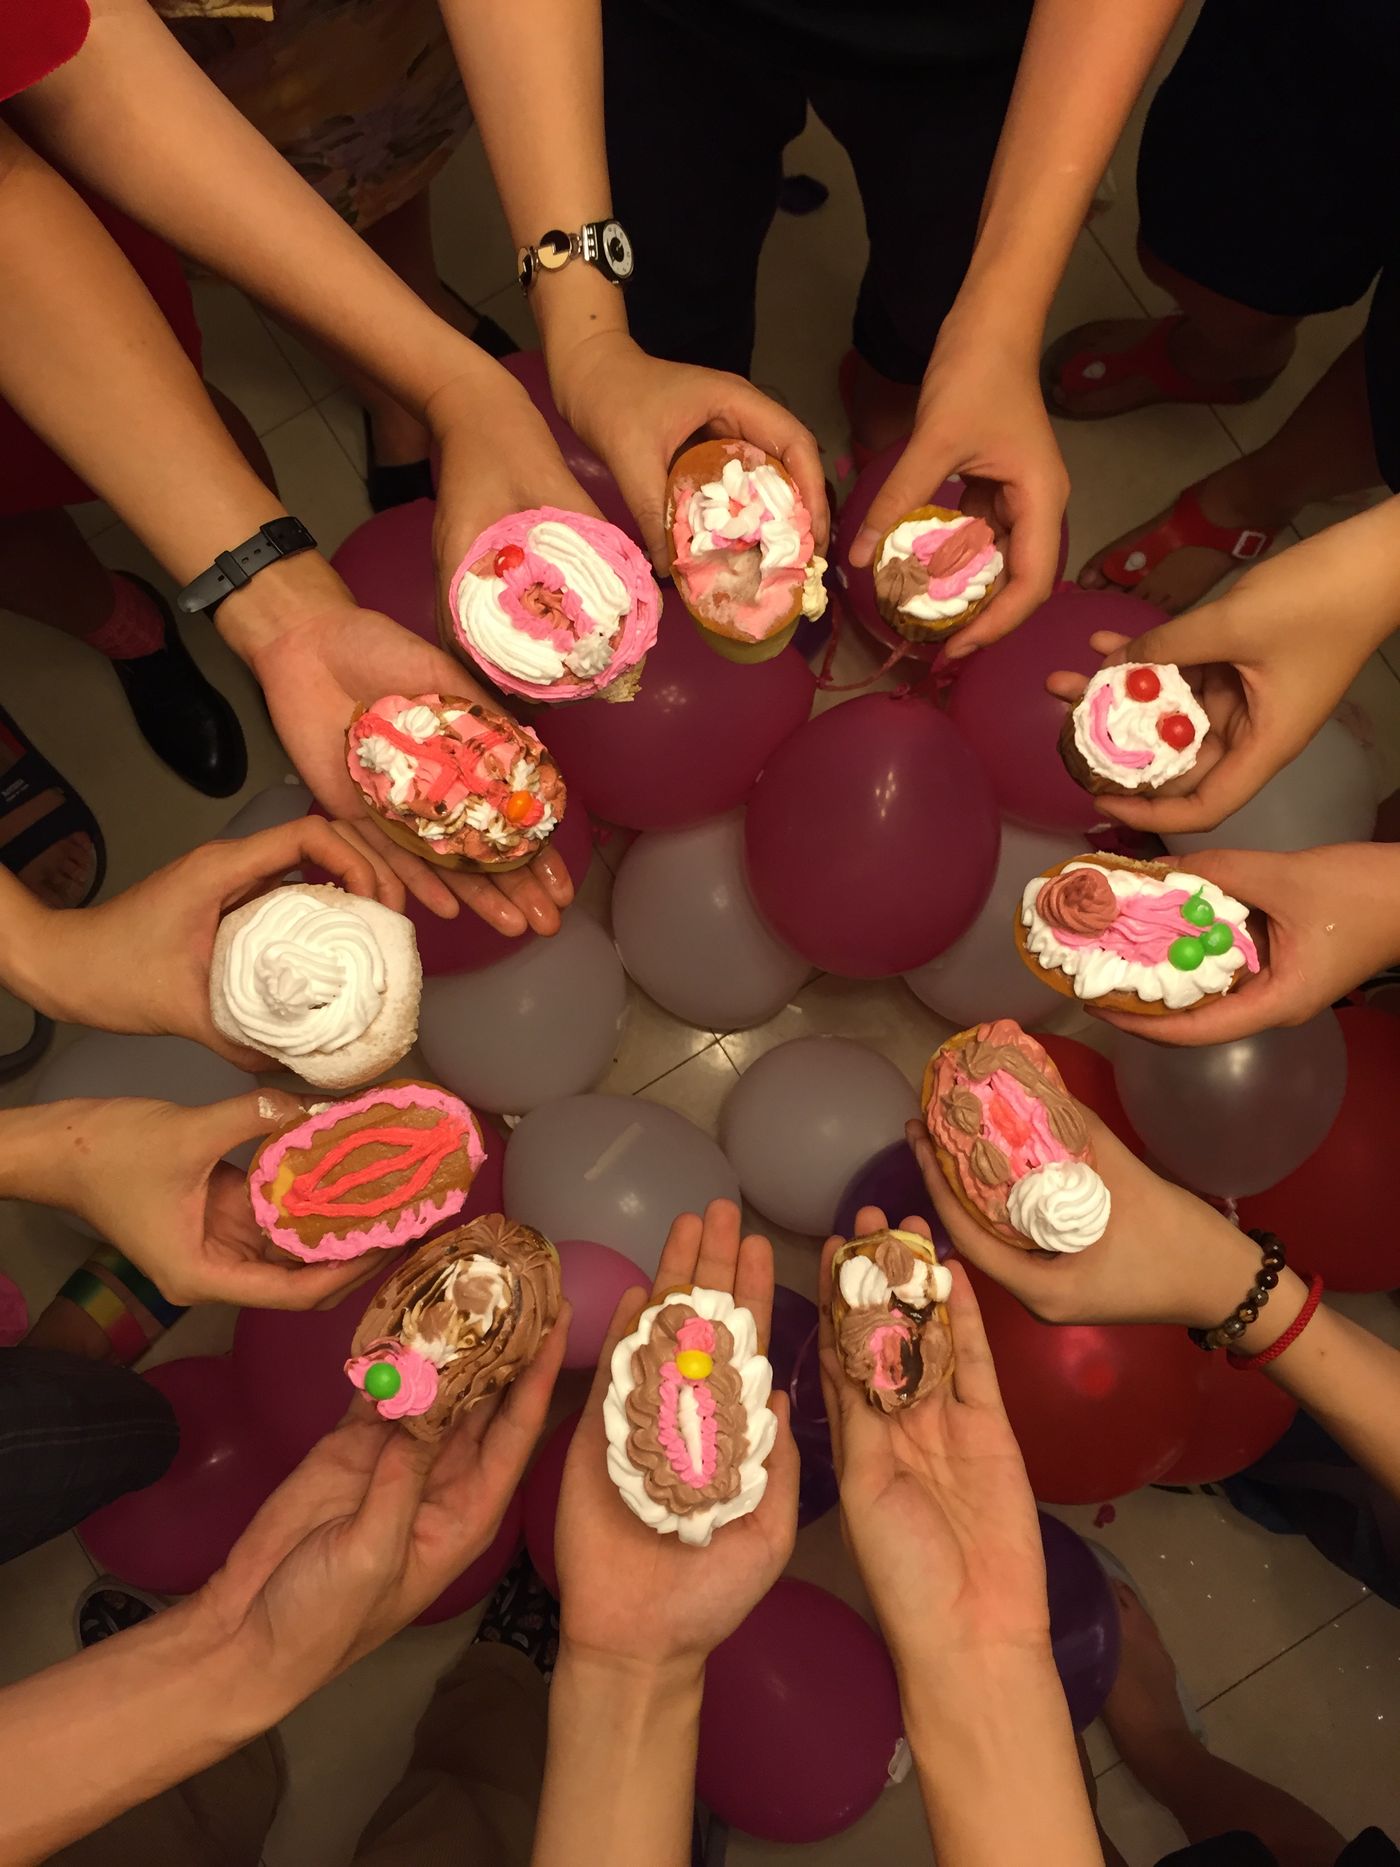 When Xiao Meili, the primary target of this current round of cyberbullying, was celebrating her birthday, we made vagina cupcakes. We are fearless when we are together.